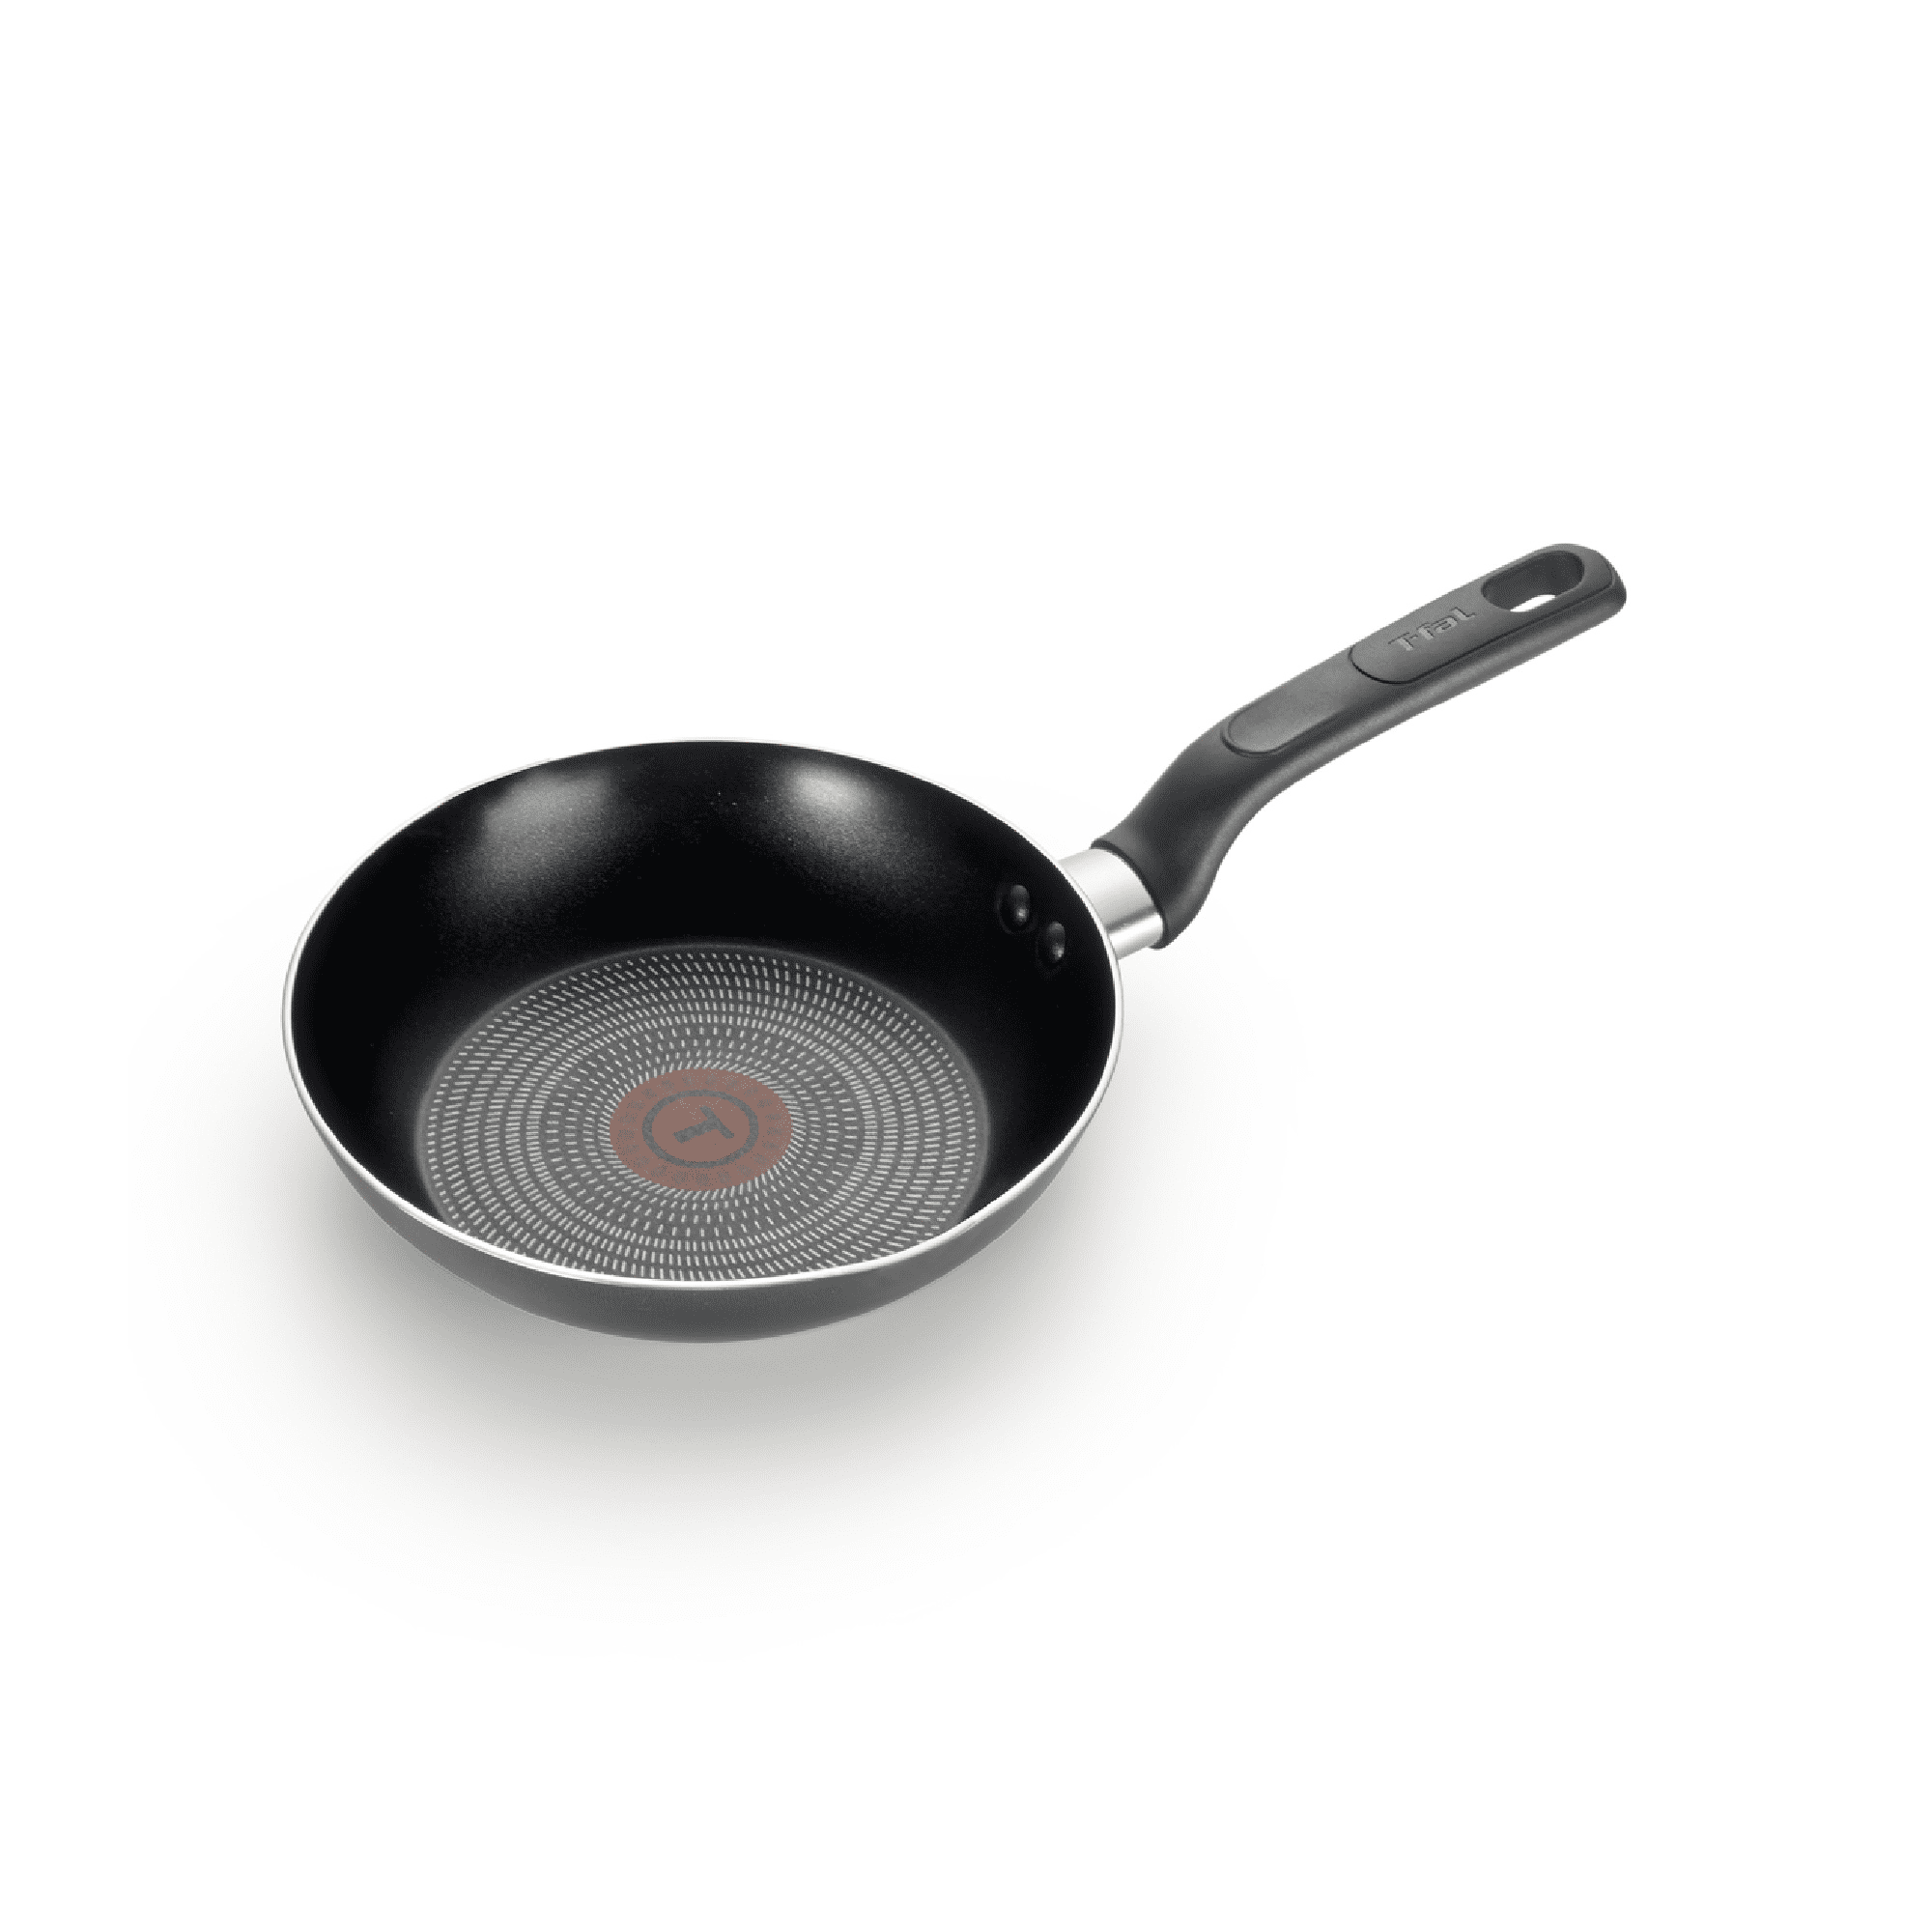 8 Inch Fry Pan Cheapest Outlet, Save 66% | jlcatj.gob.mx